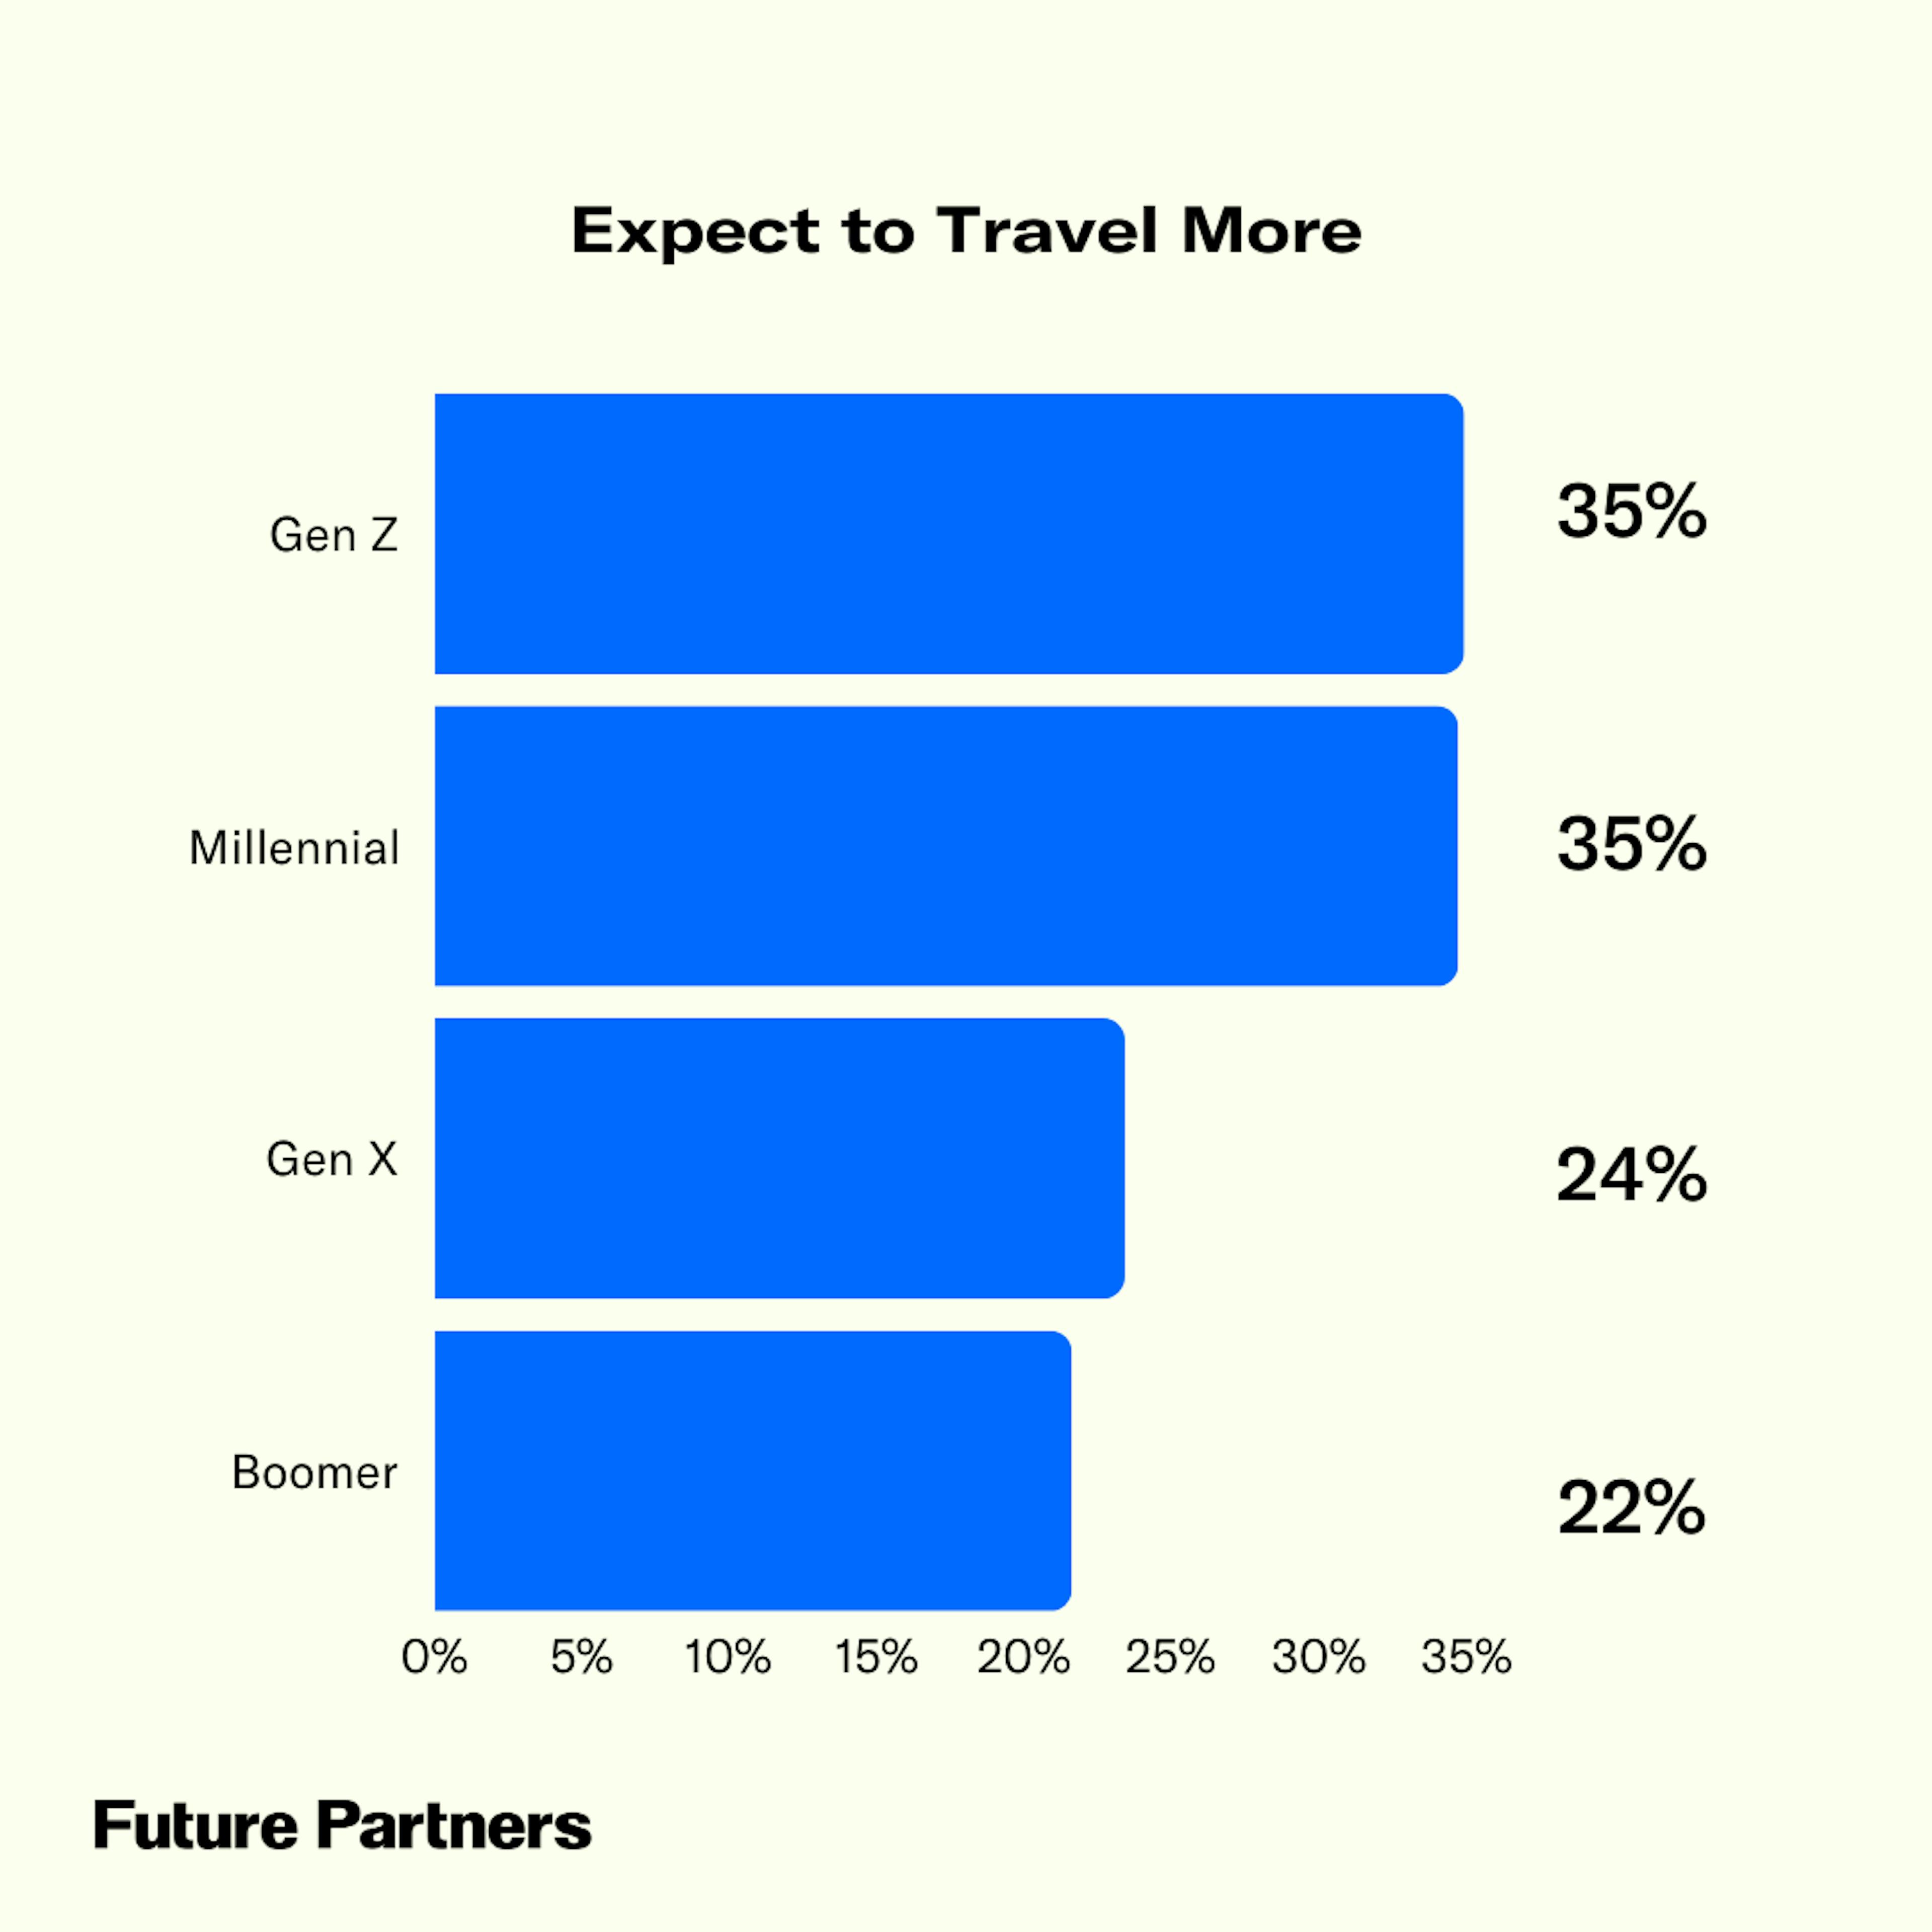 Gen Z are the most likely to maximize, 35% saying they expect to travel more this year.